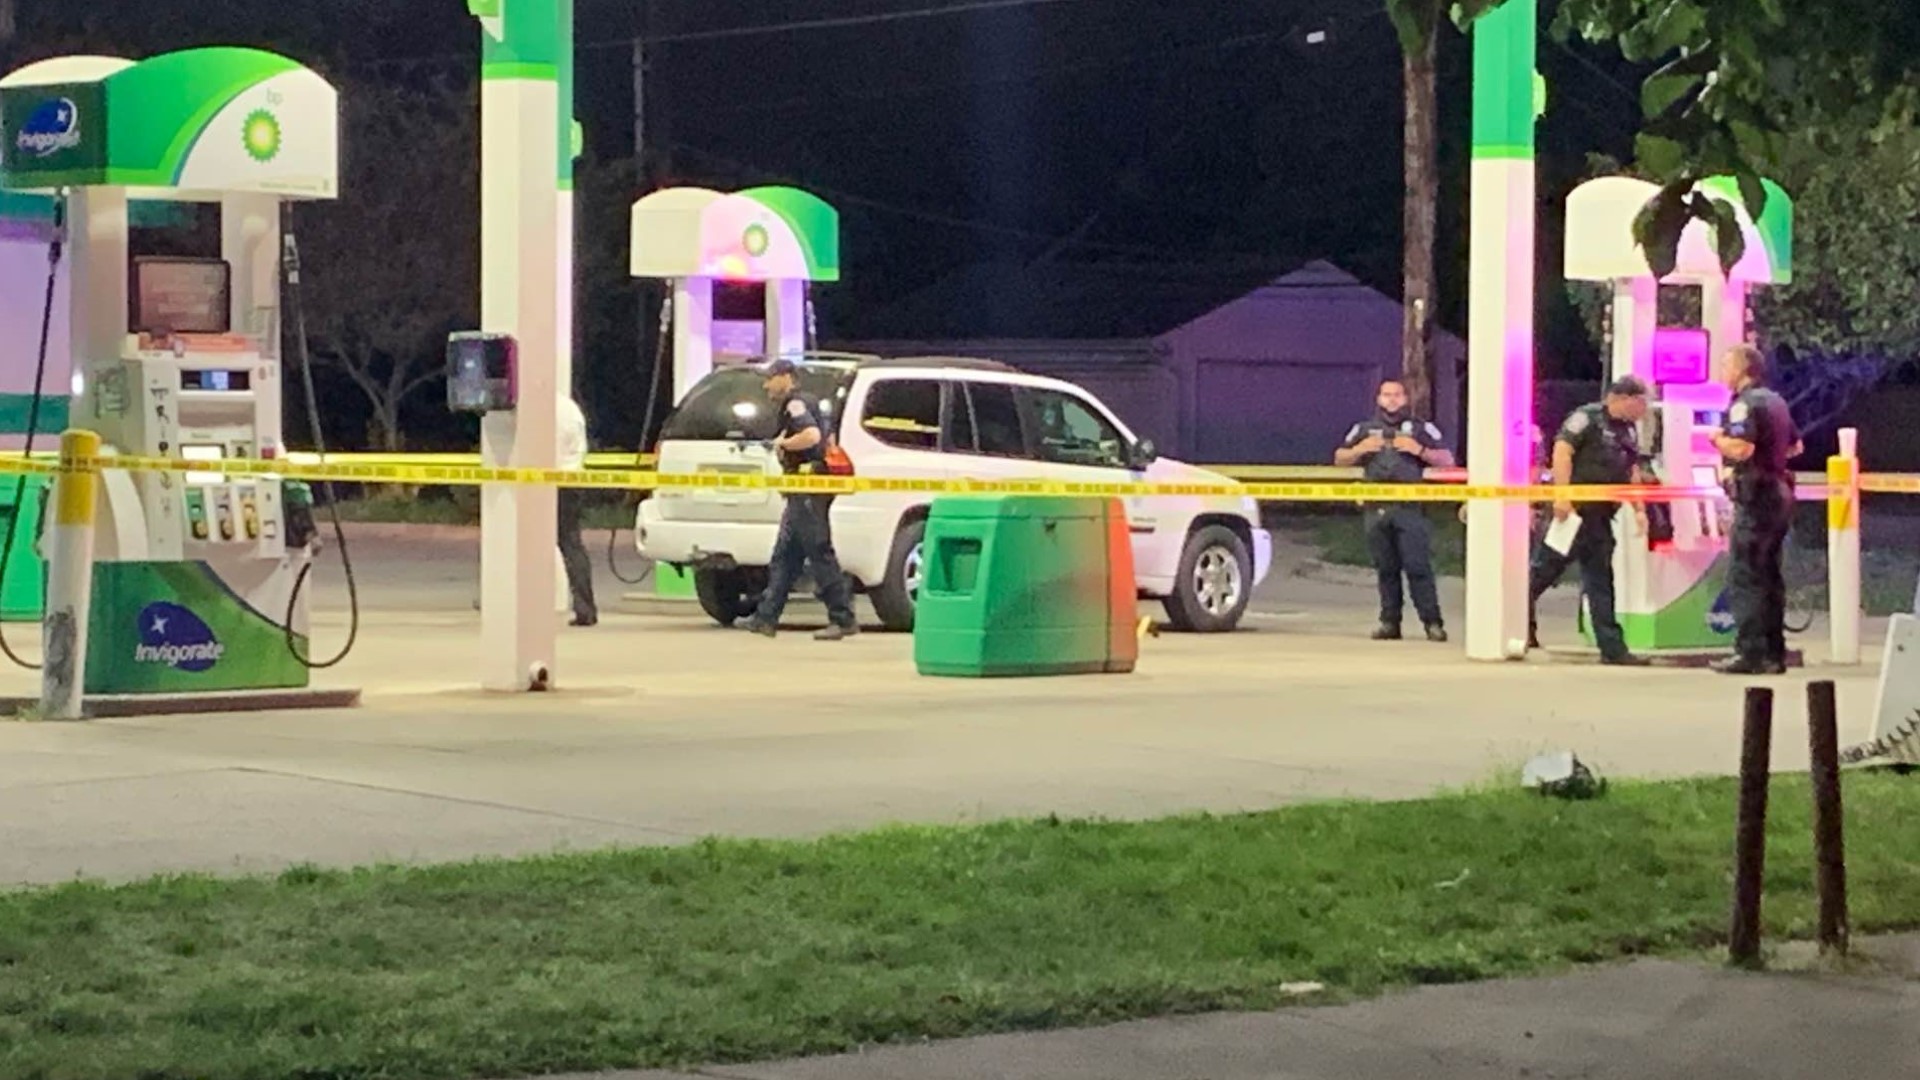 Officers responded to the BP gas station near the intersection of East Raymond and South Shelby streets around 4:30 a.m. Friday.